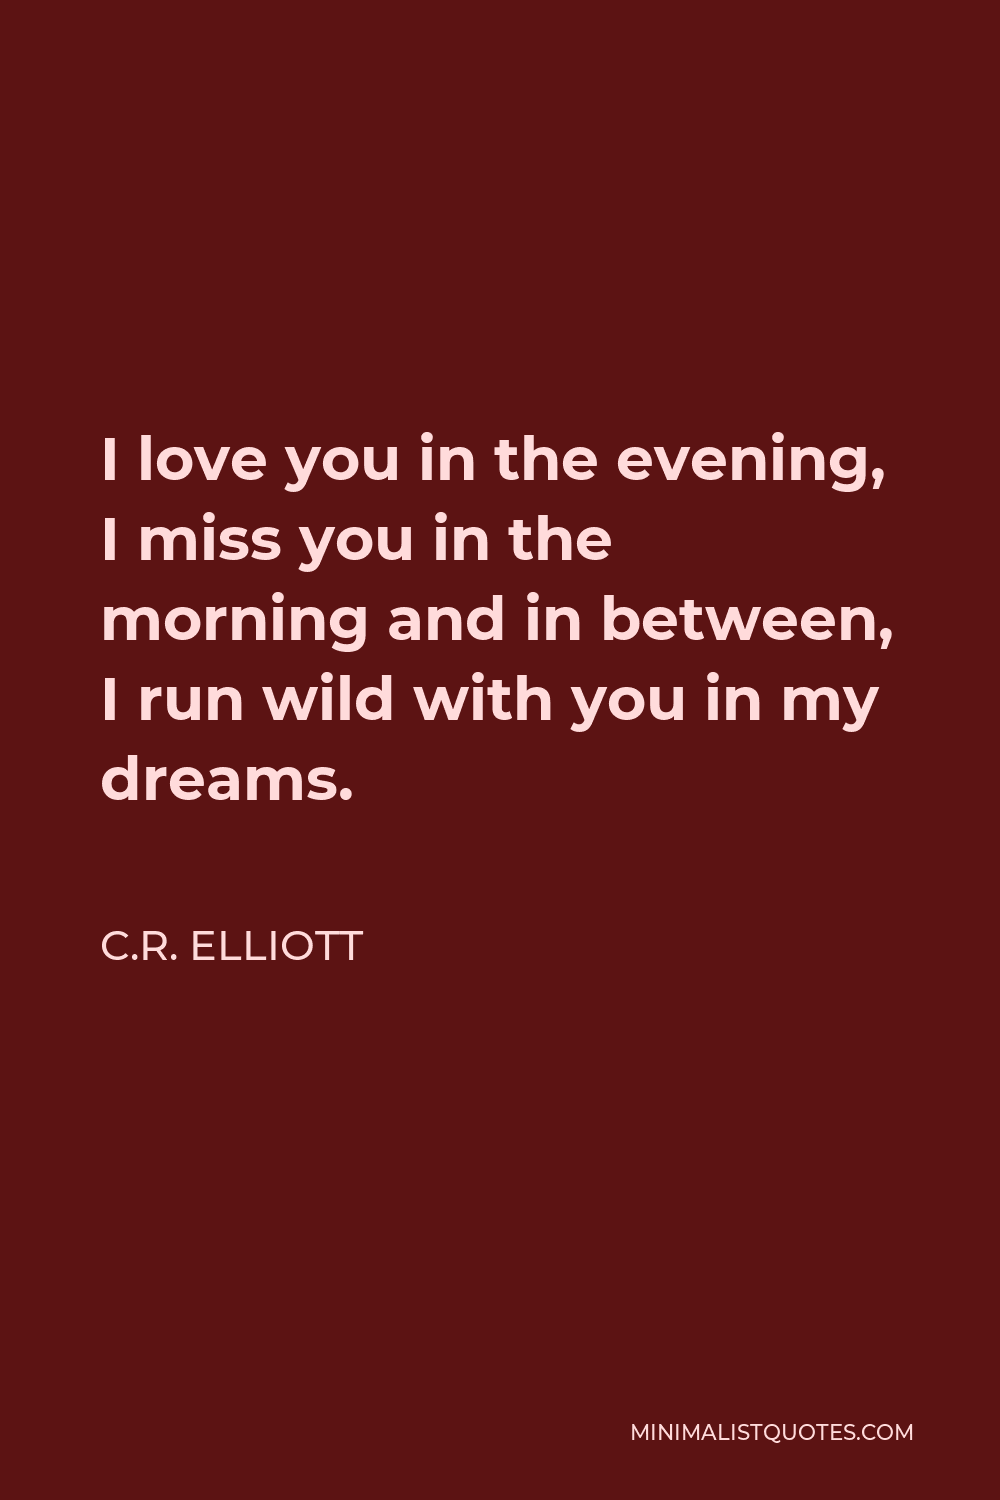 C.R. Elliott Quote - I love you in the evening, I miss you in the morning and in between, I run wild with you in my dreams.